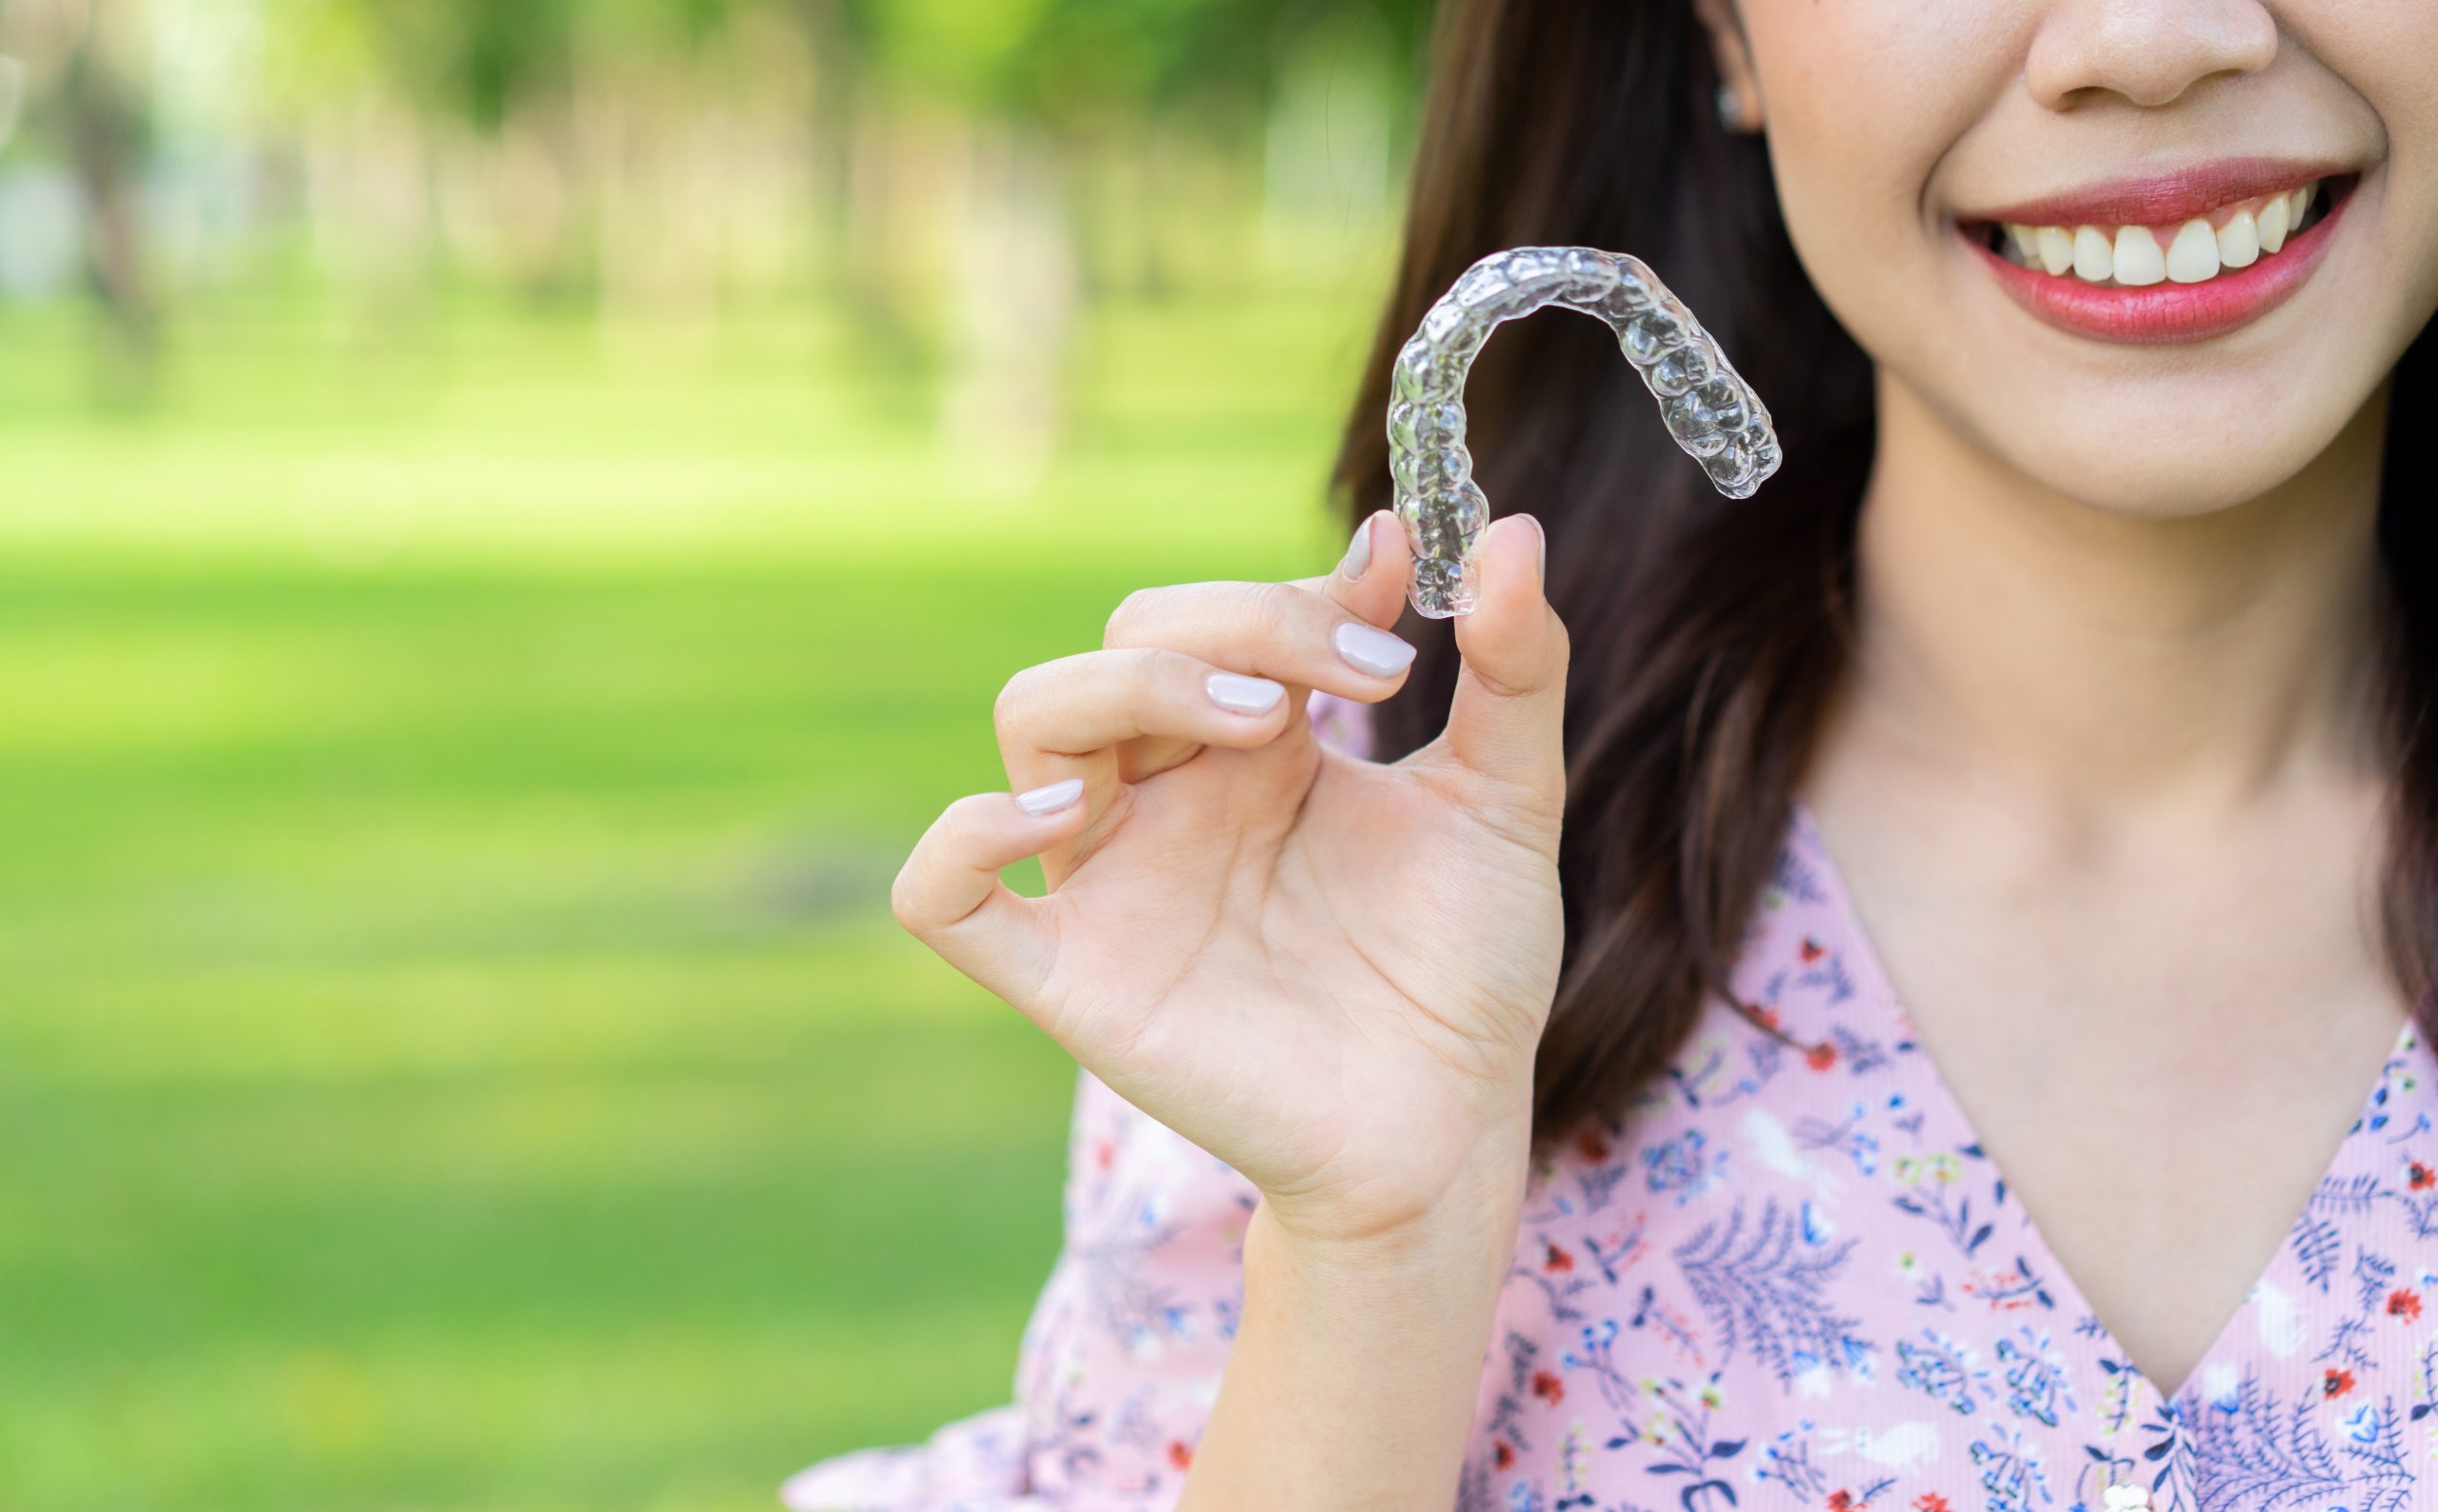 Invisalign teen braces in London – invisible orthodontic braces for teenagers